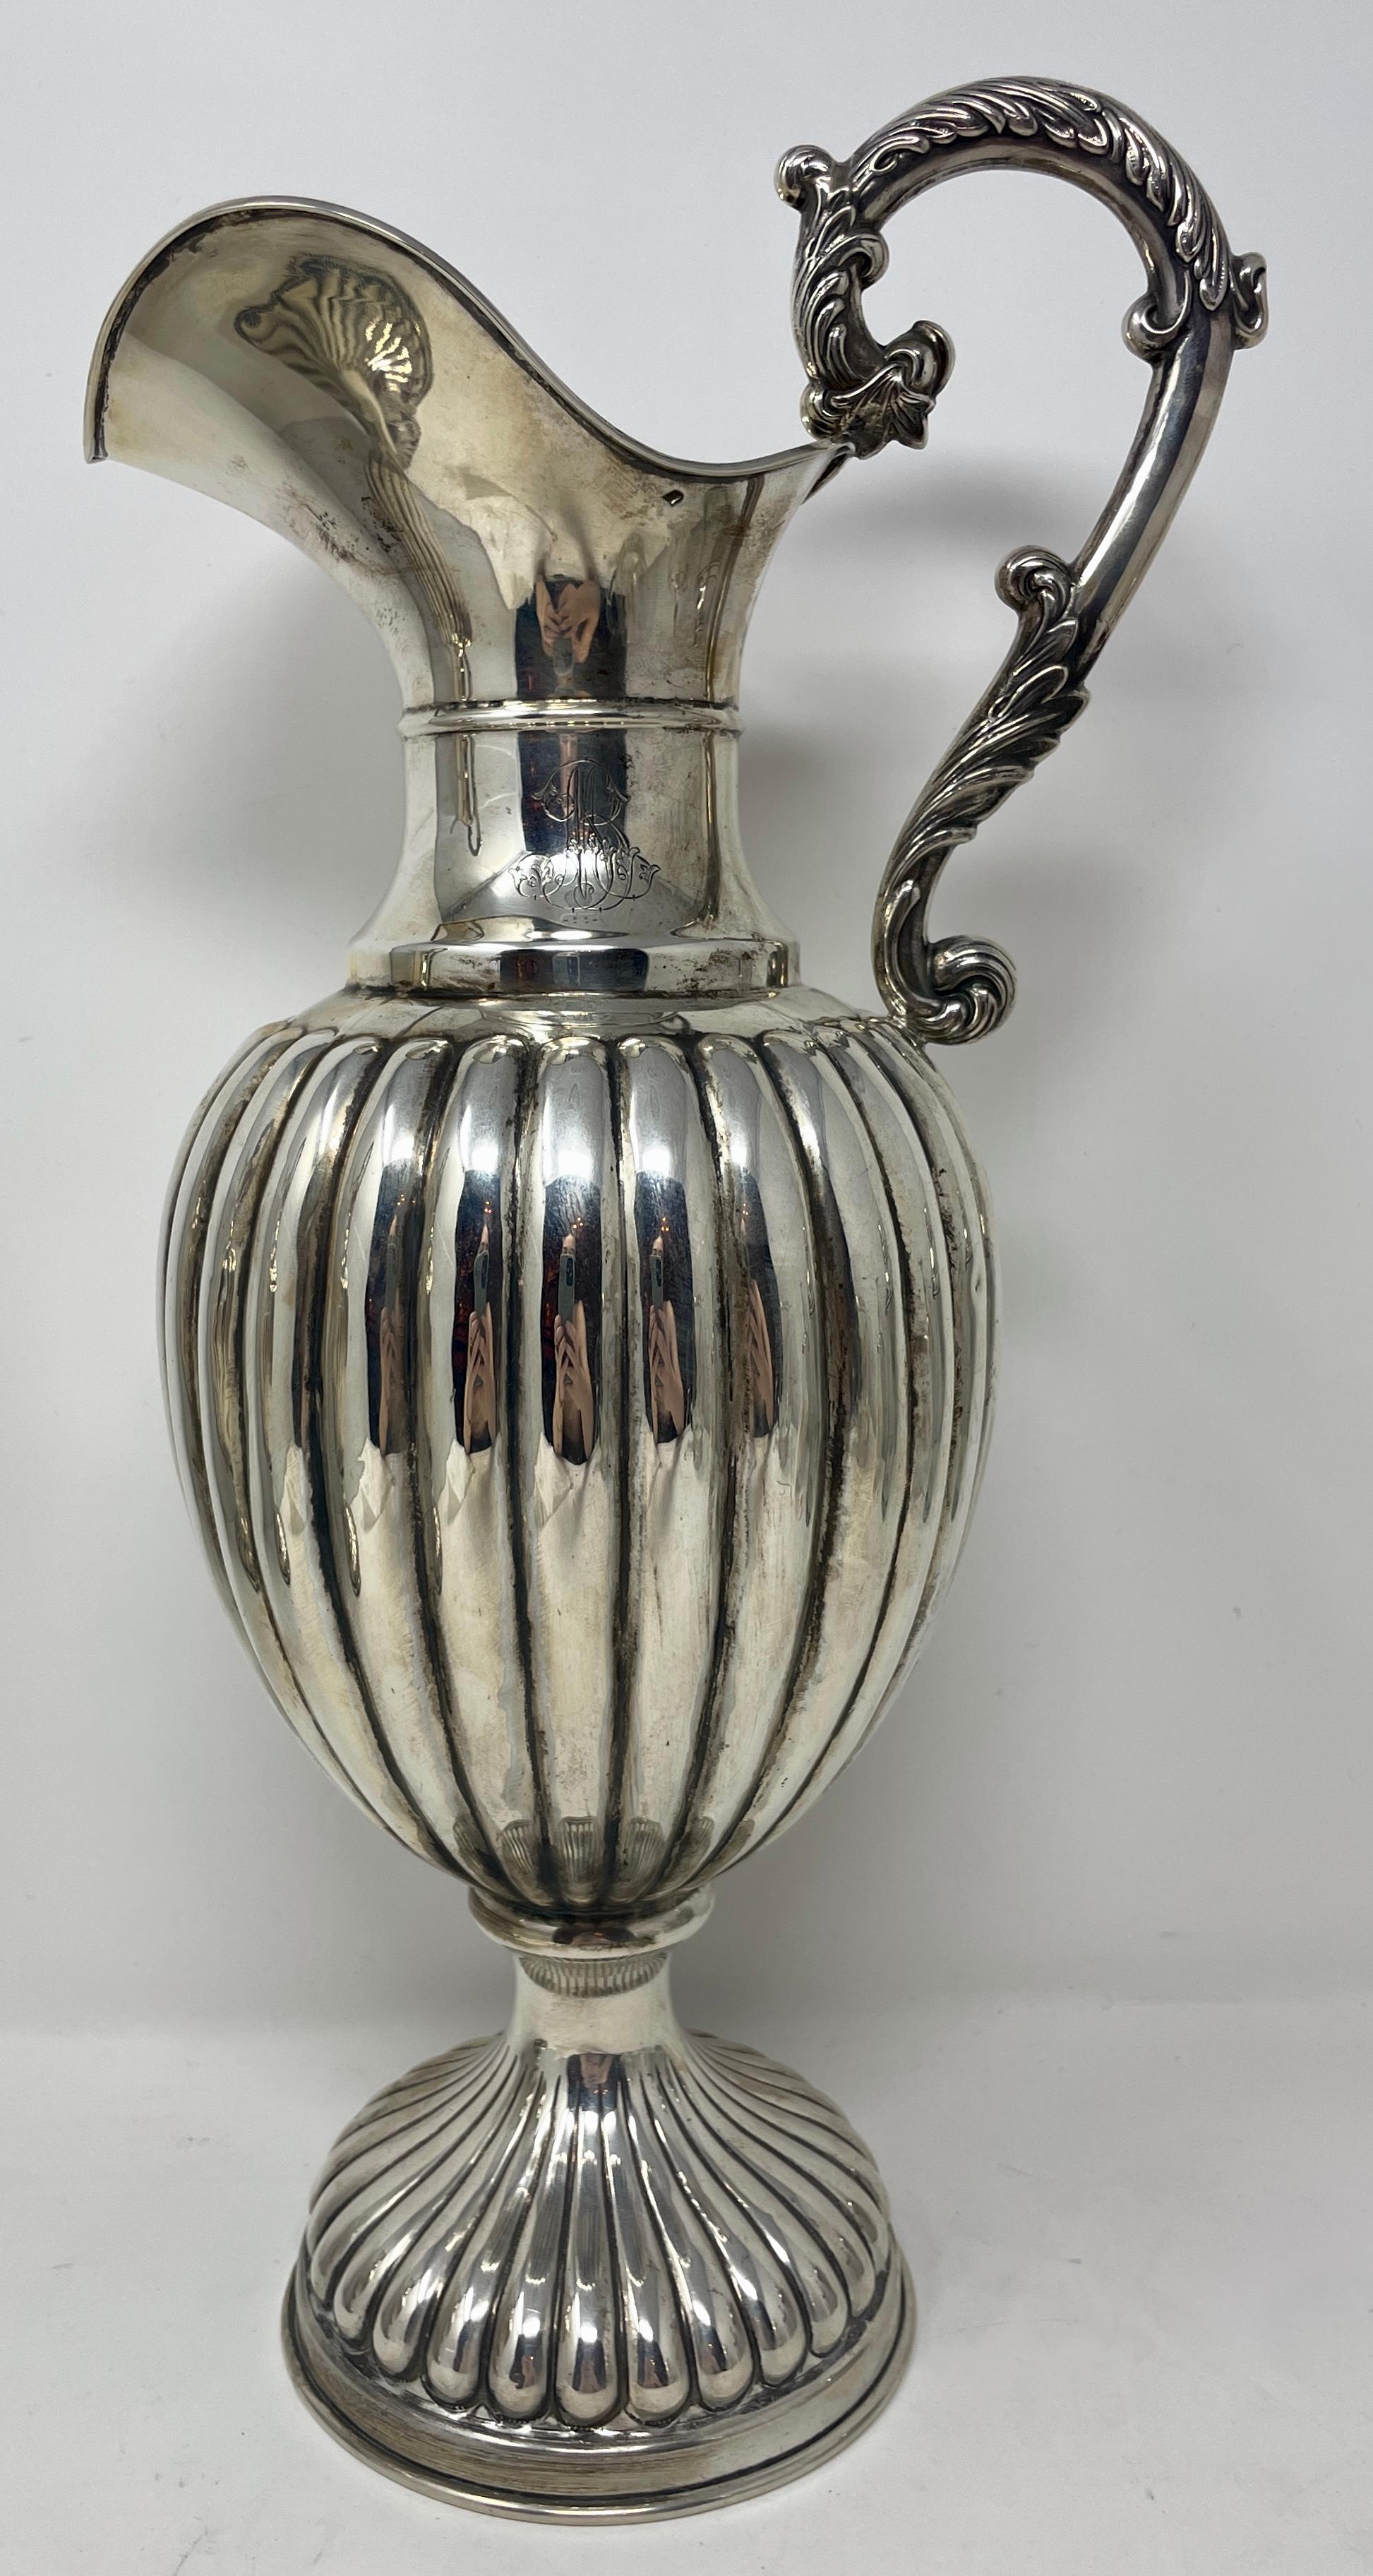 Wonderful old pair Antique French sterling silver water jugs or pitchers, circa 1860.

 